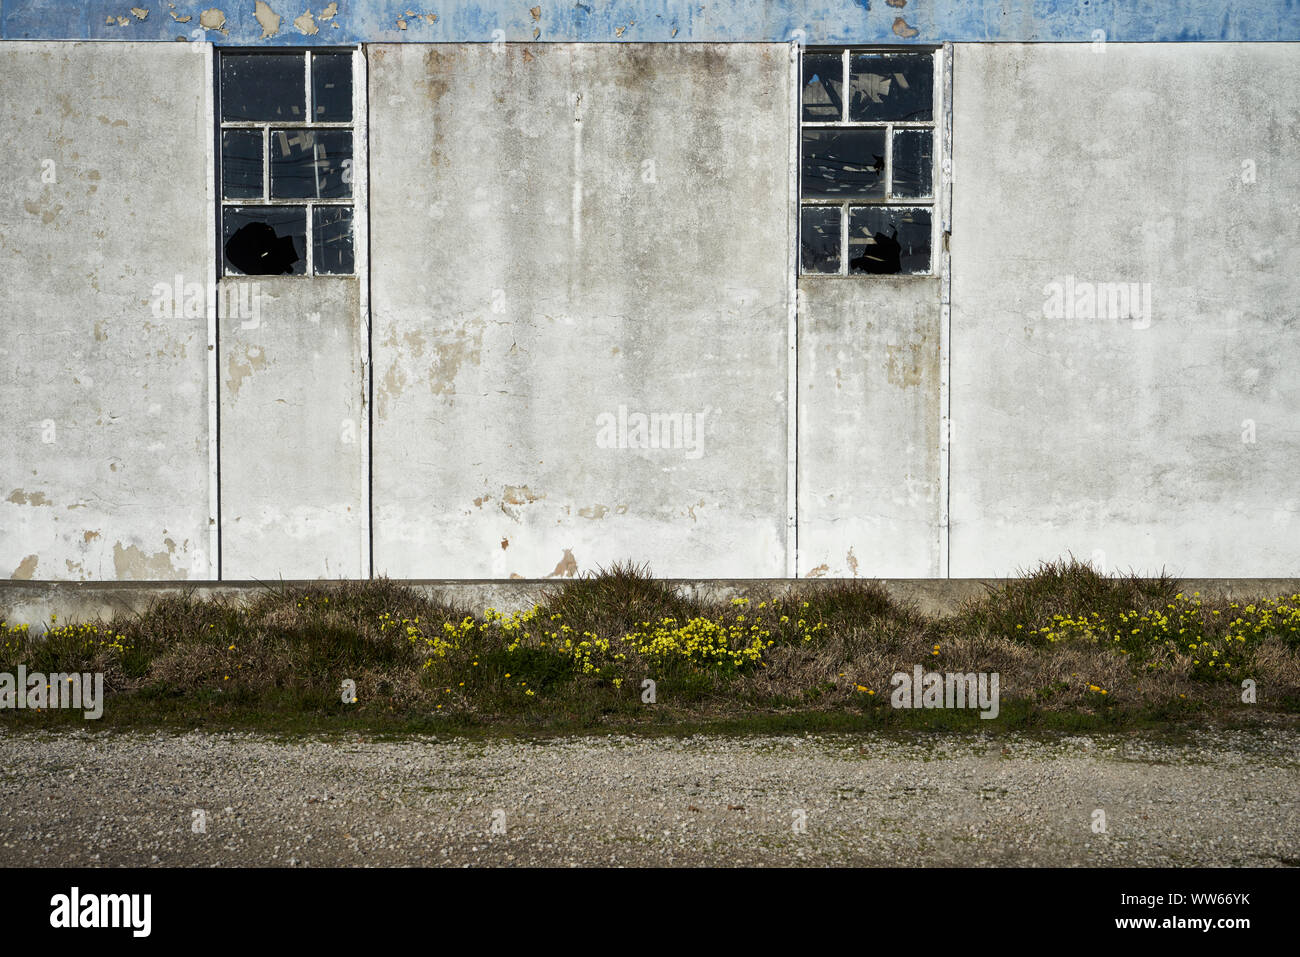 Old warehouse with two window fronts and yellow flowers Stock Photo